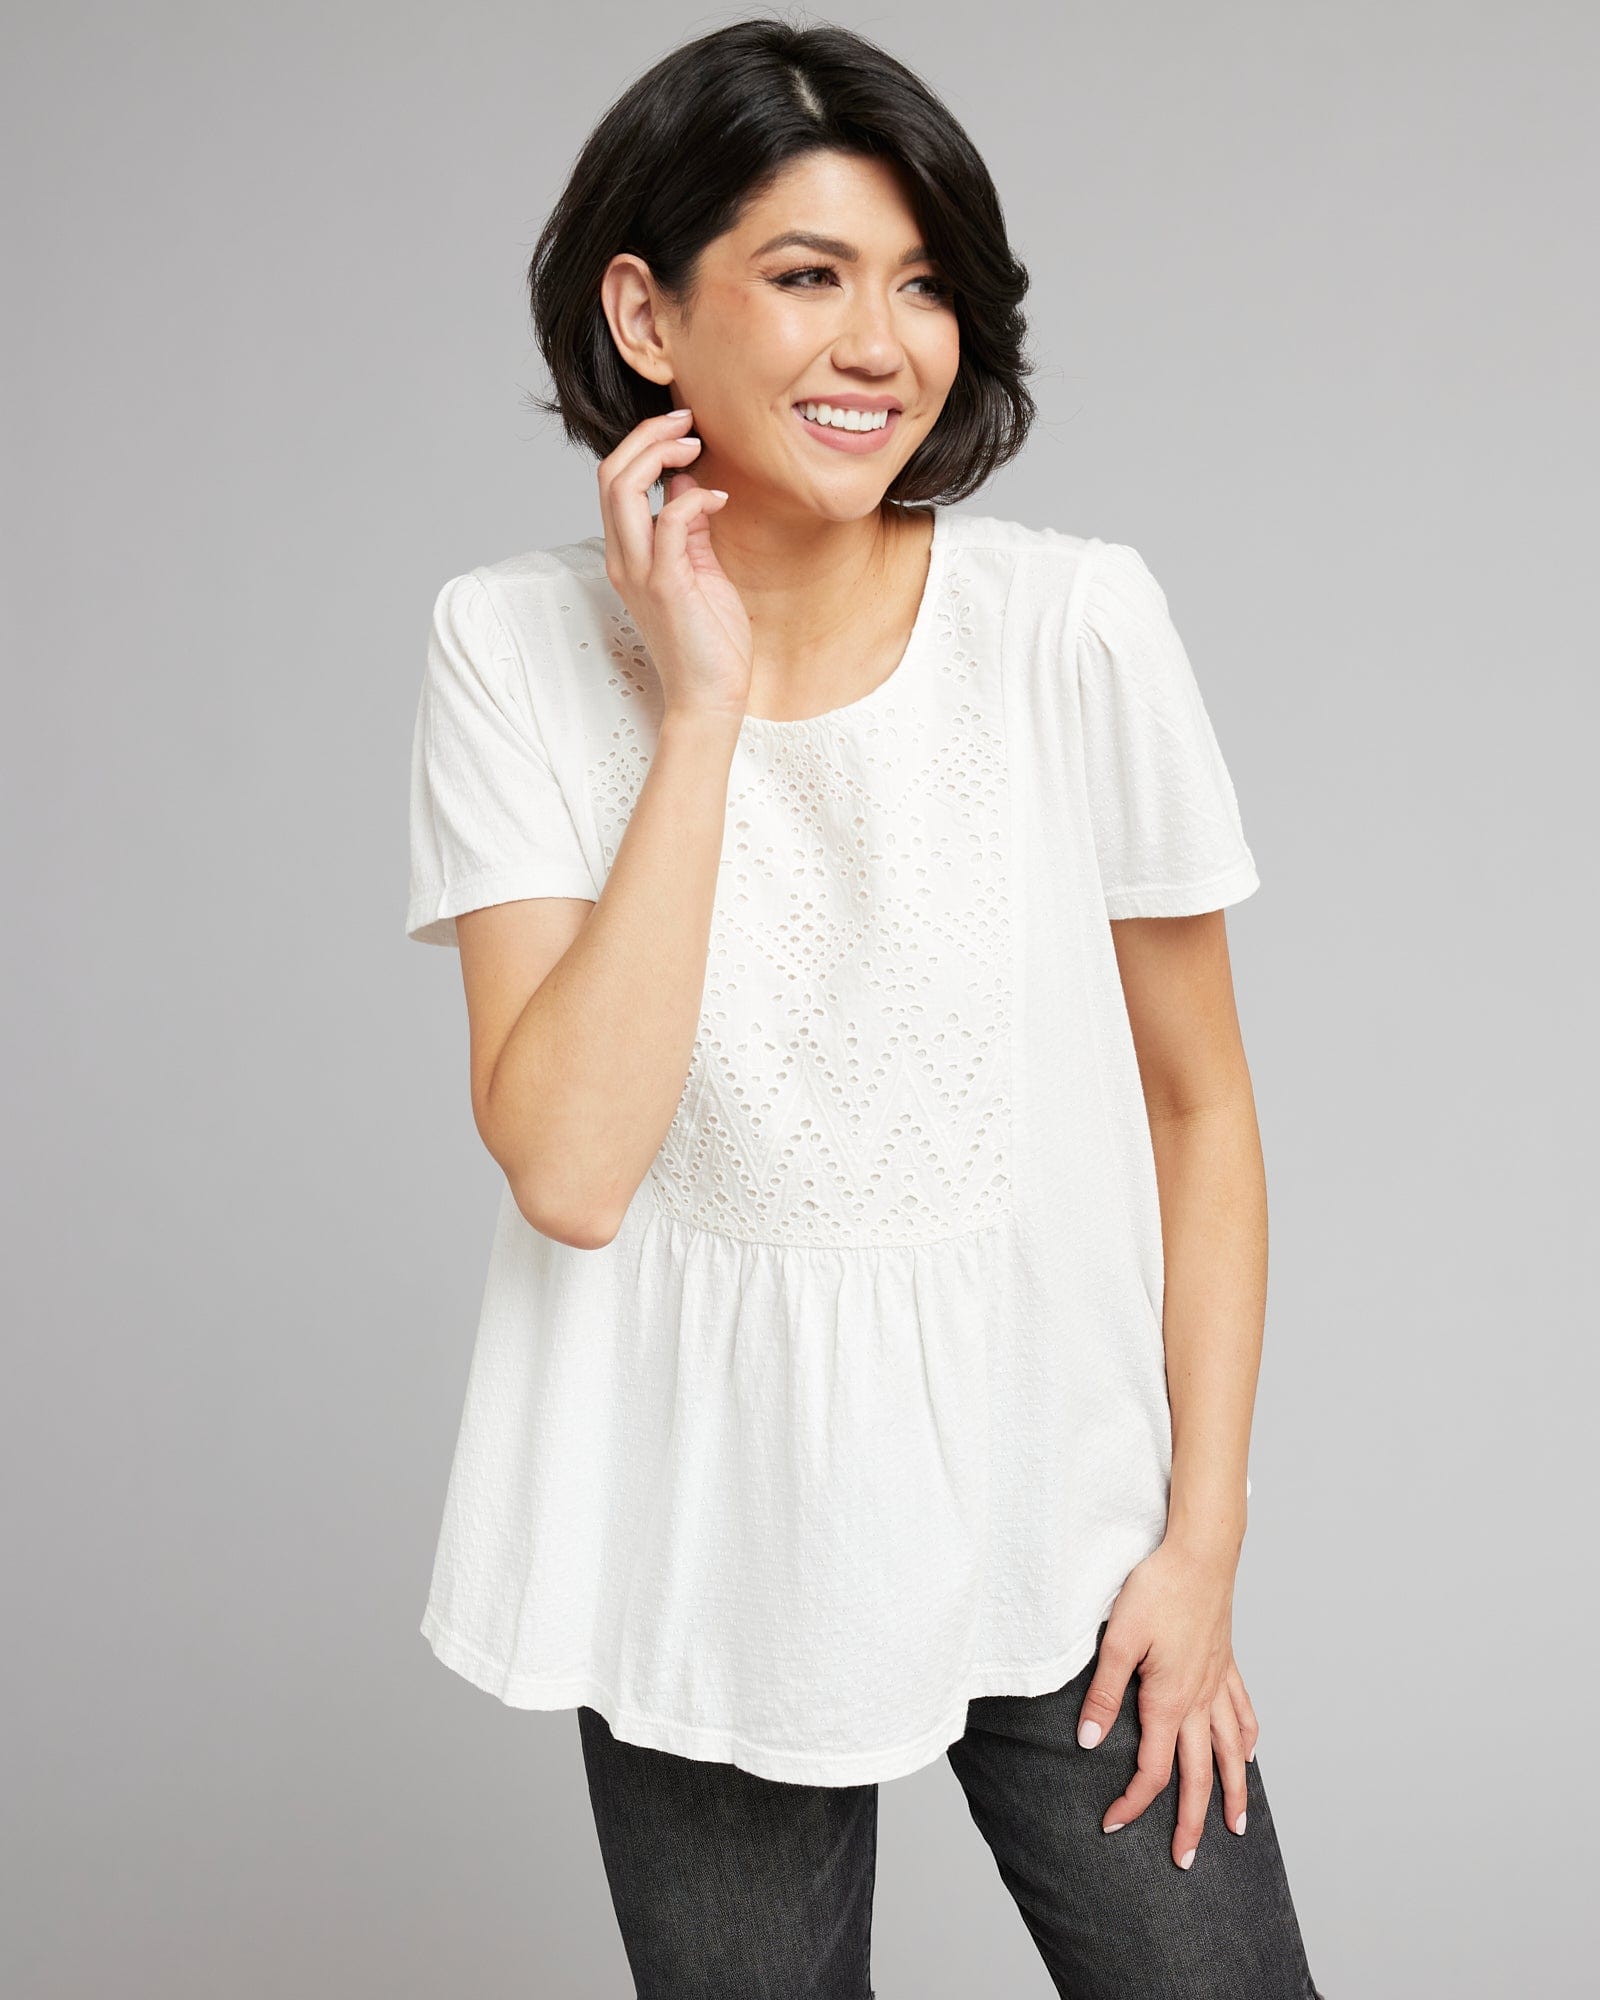 Woman in a white, short sleeved, top with eyelet motif on front